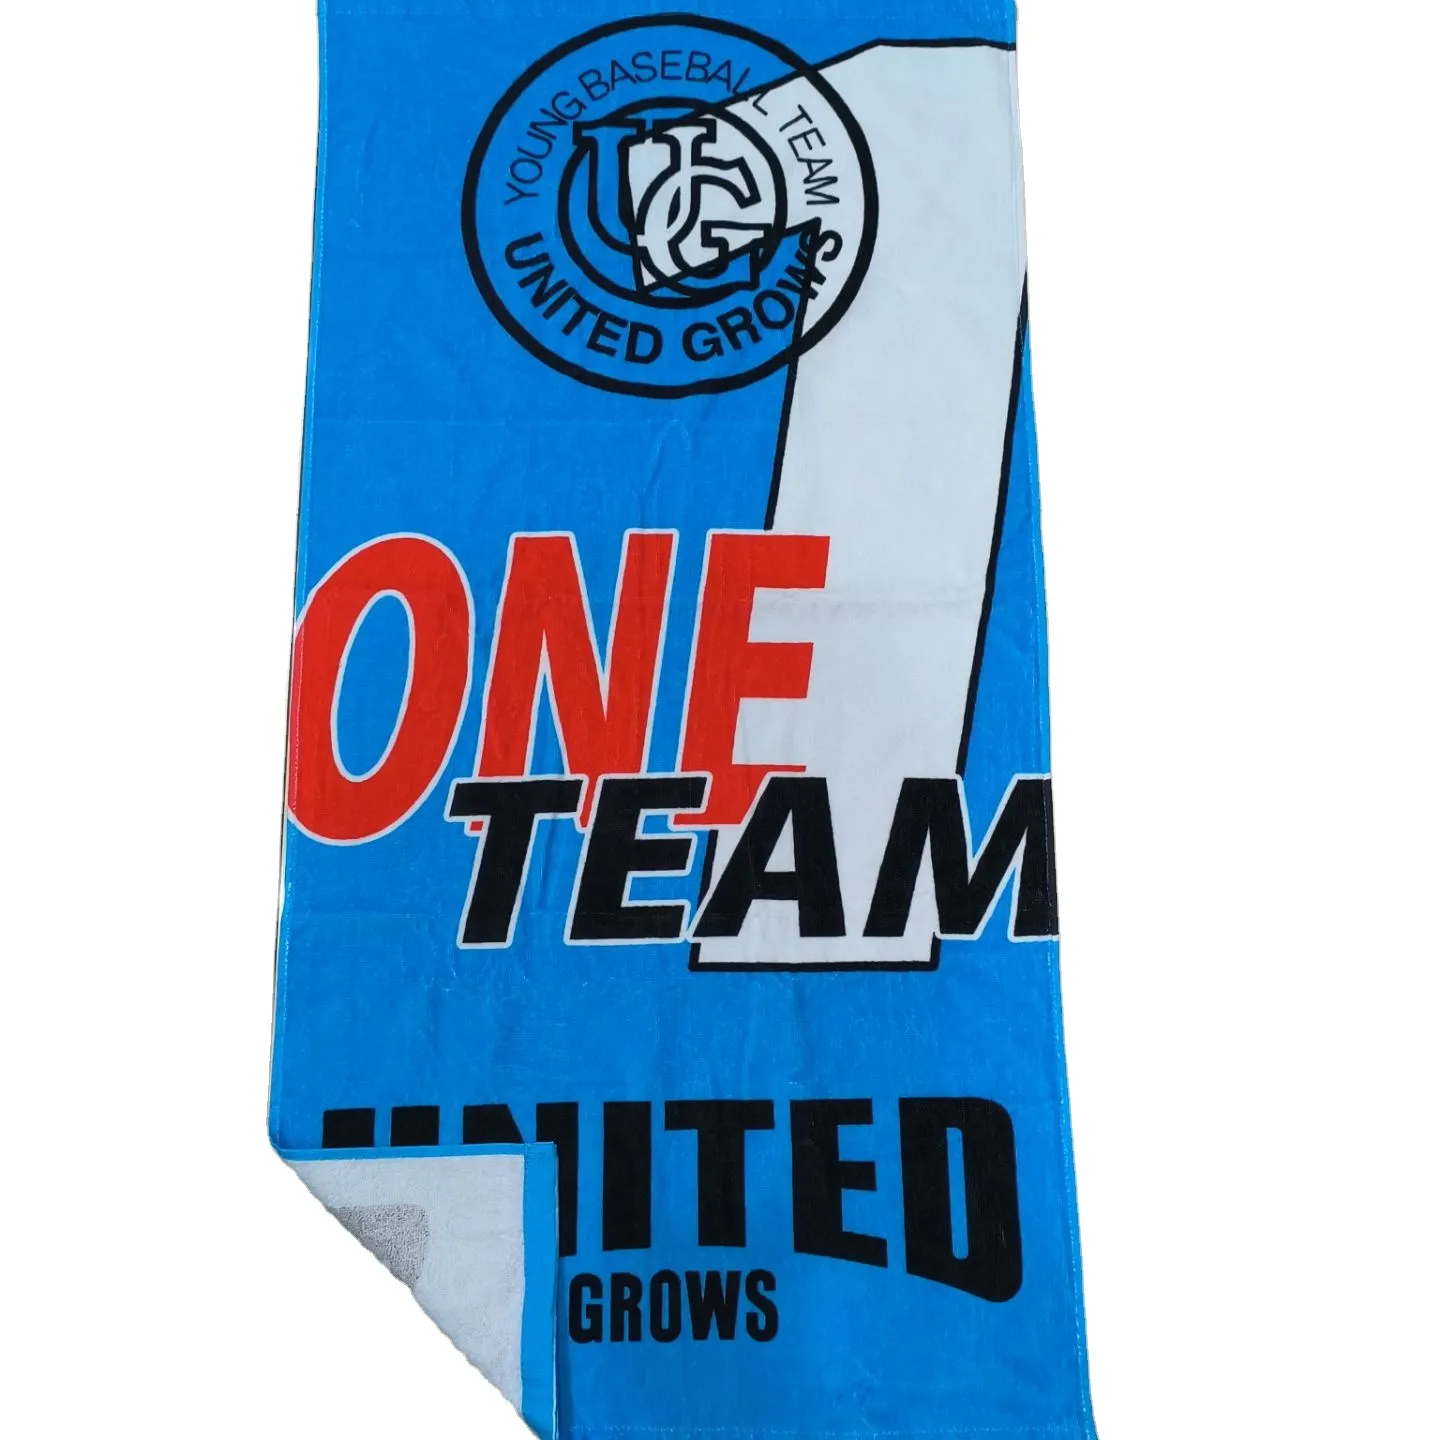 promotion Custom rally racing towel sublimation printed design high quality cotton sport towel Race towel